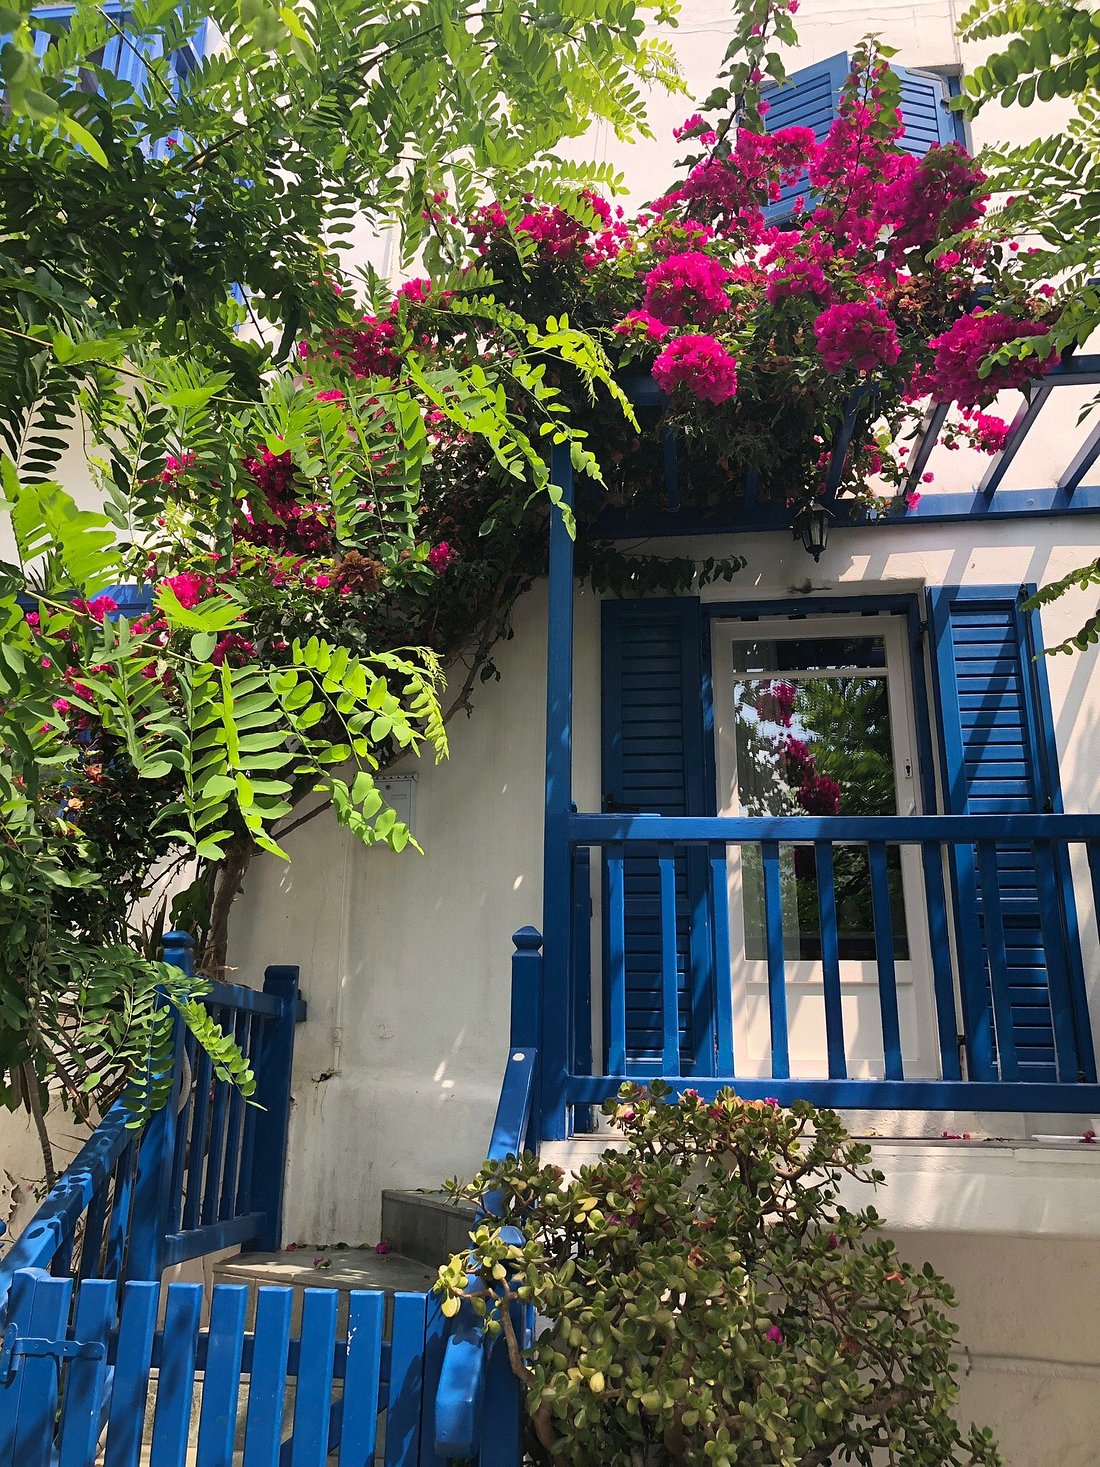 local house with beatifull flowers